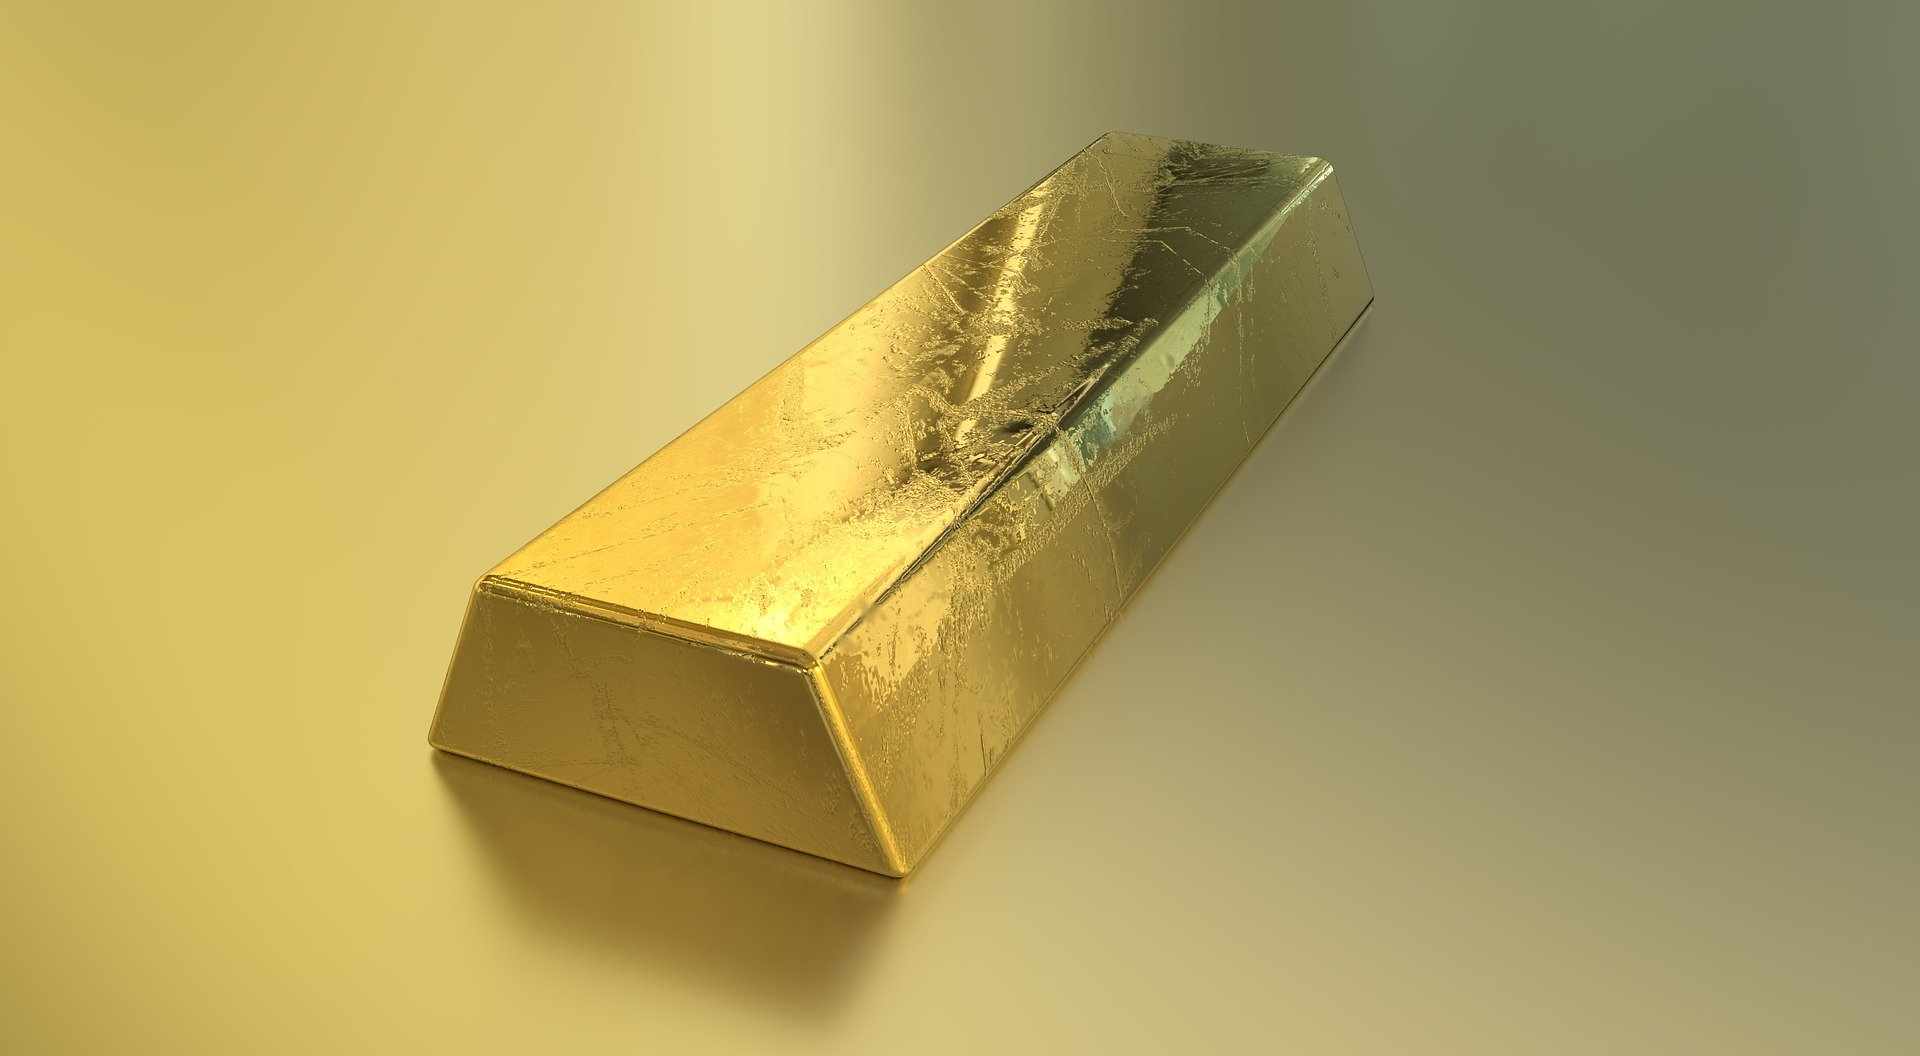 Have you lost a bag of gold in a Swiss train?